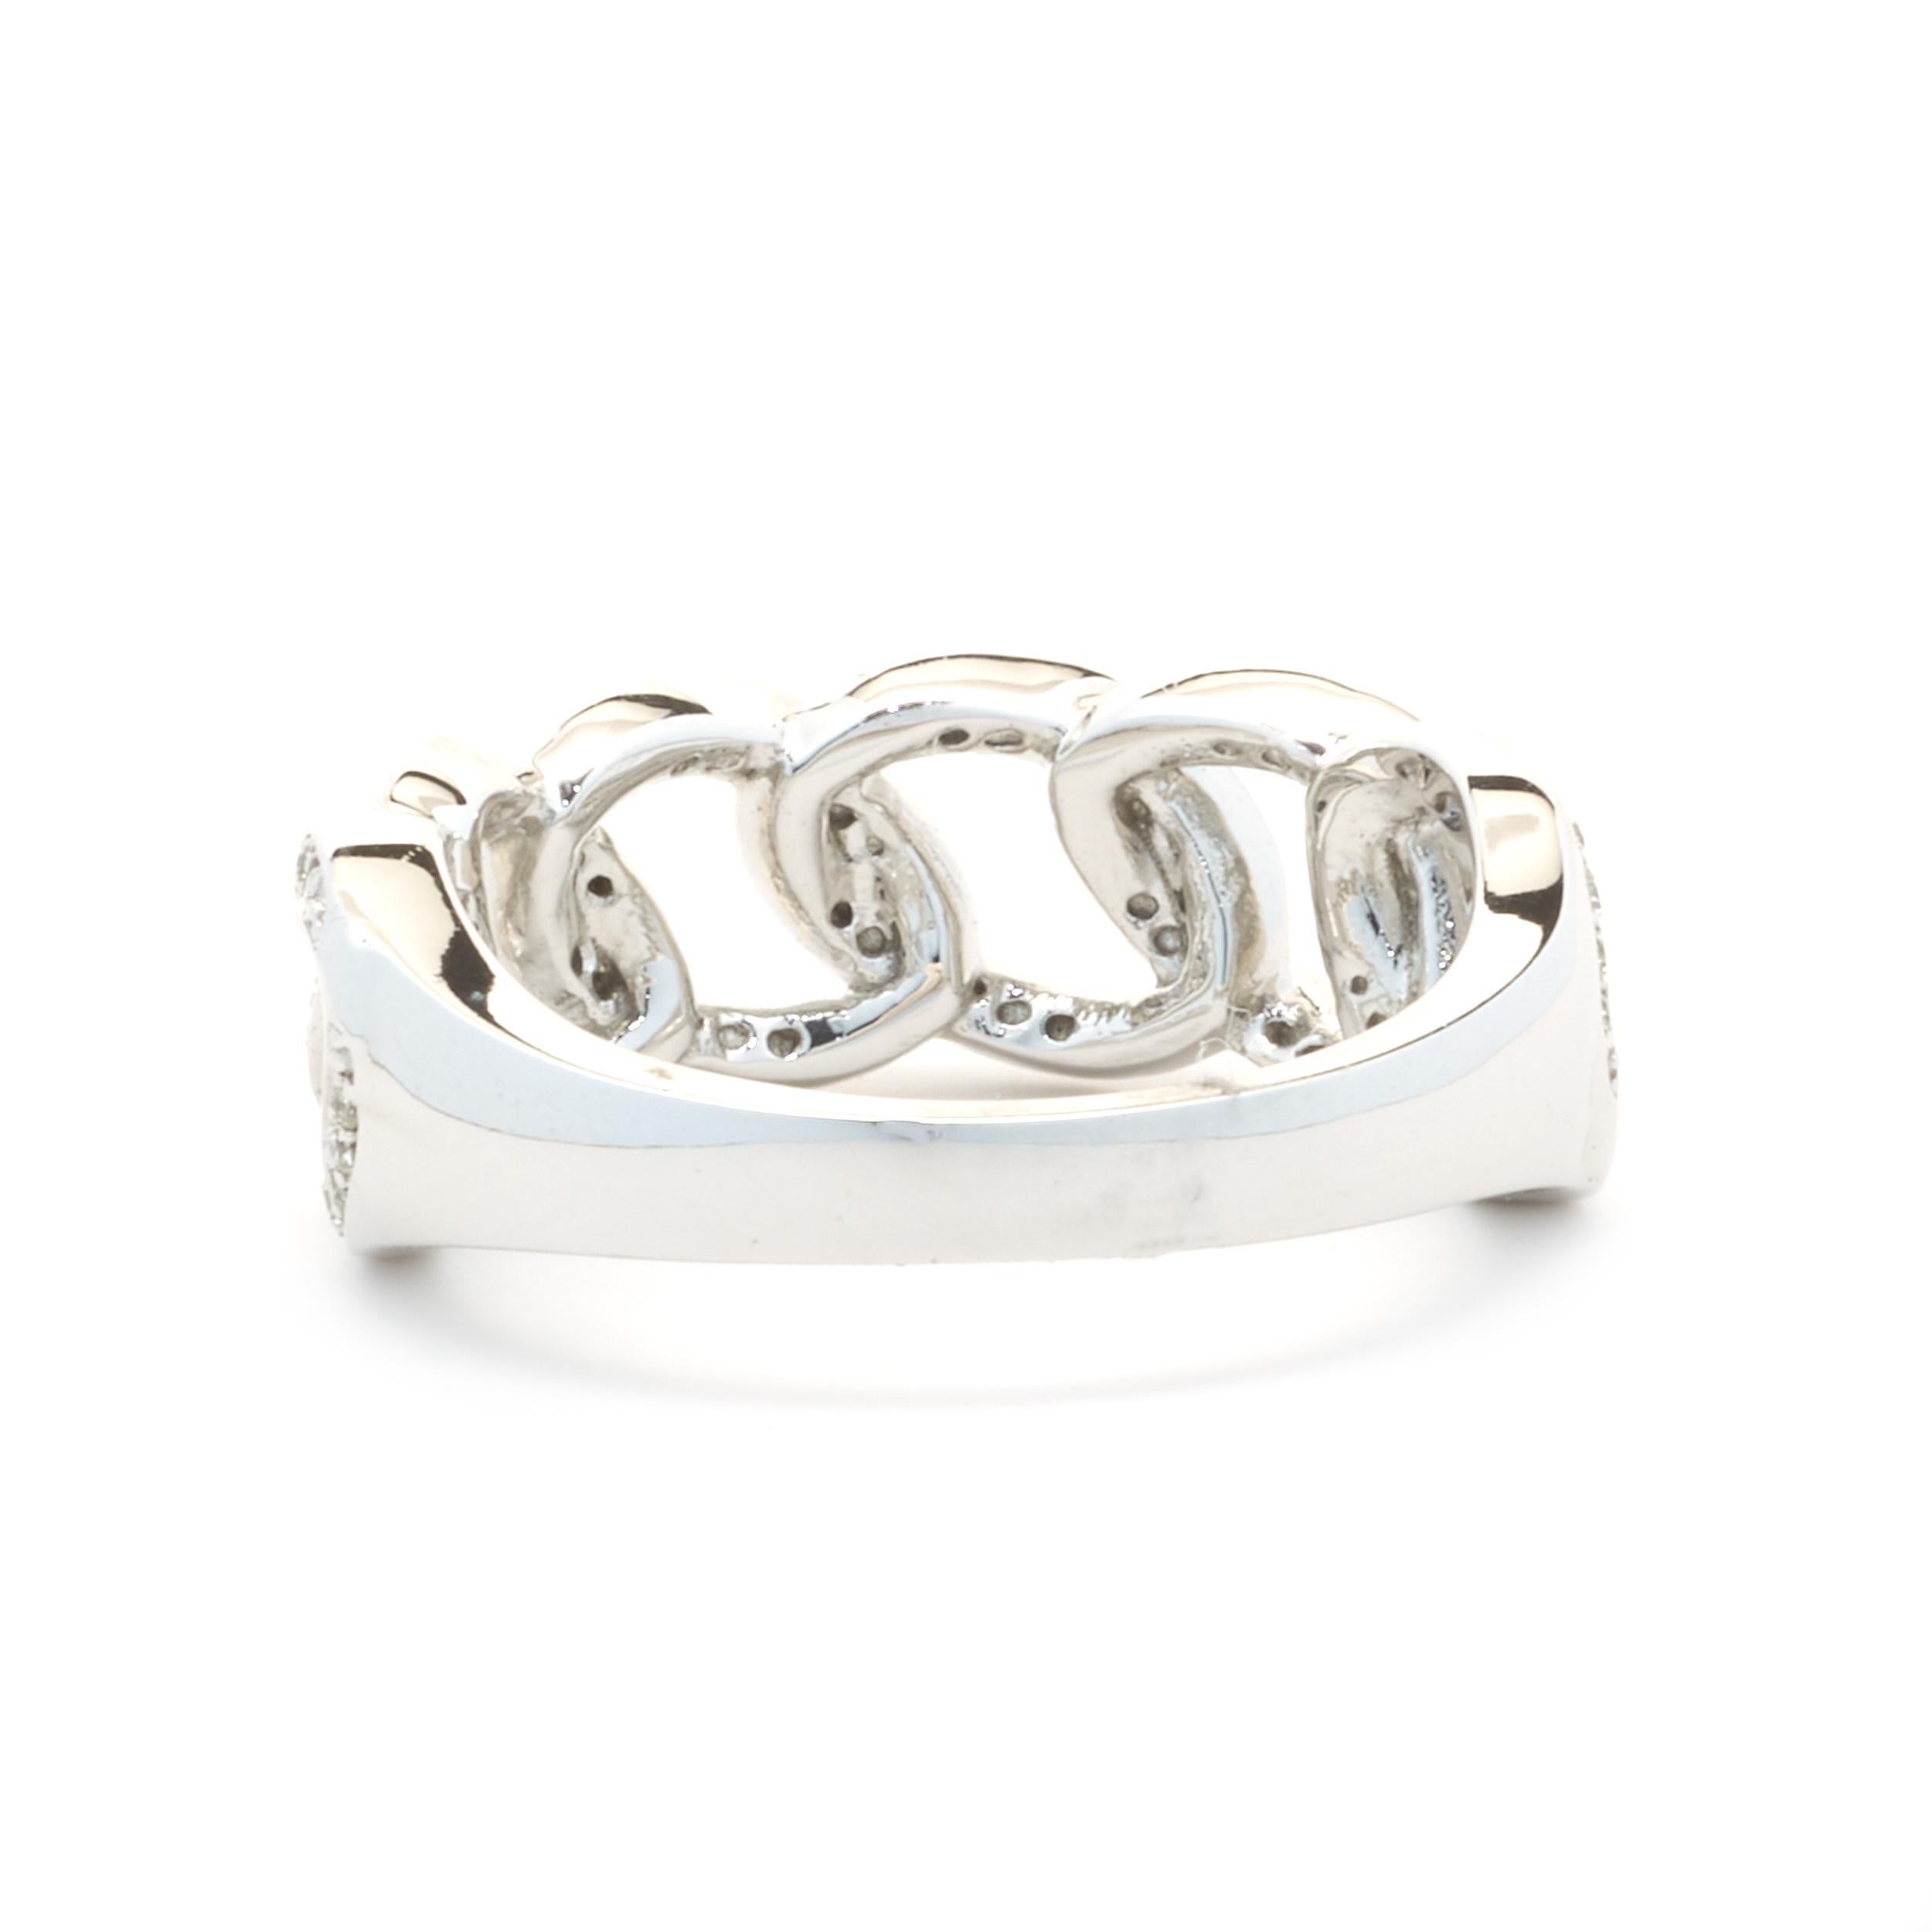 14 Karat White Gold Diamond Circle Link Band In Excellent Condition For Sale In Scottsdale, AZ